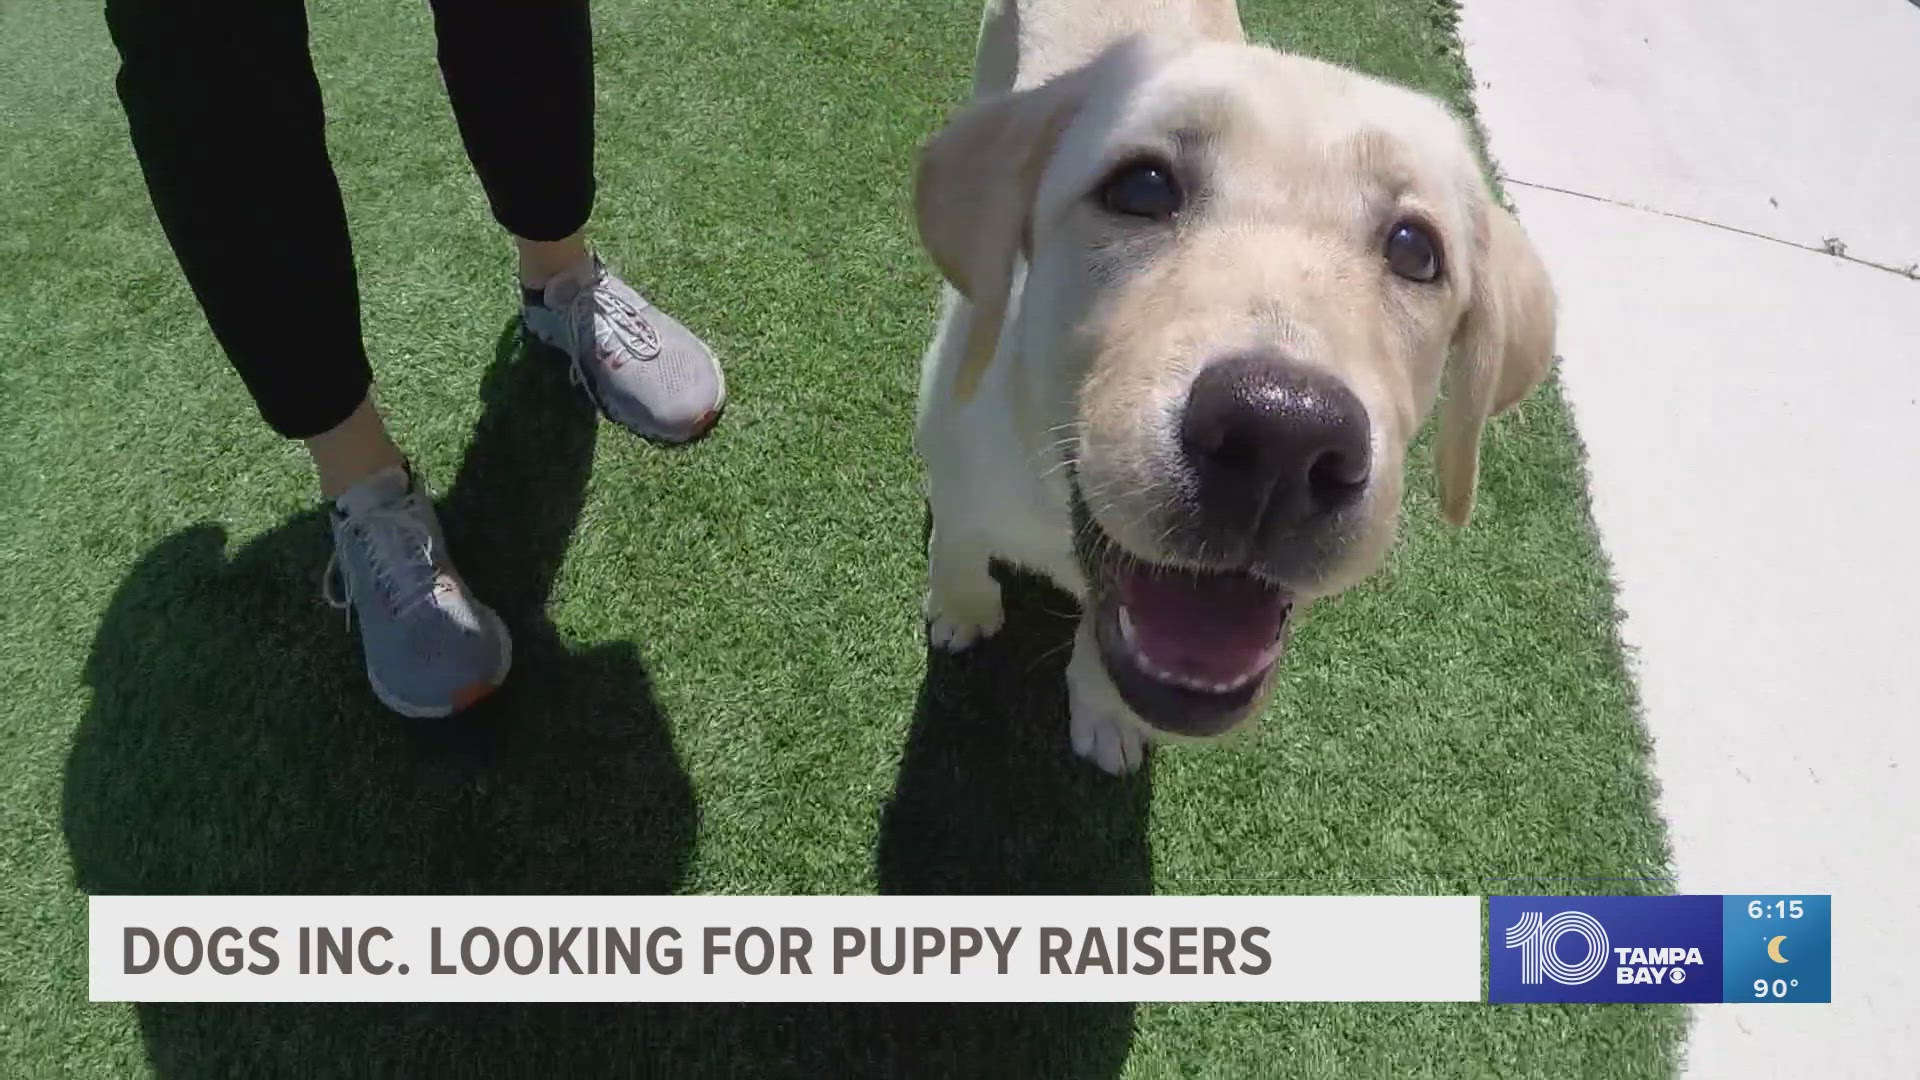 Dogs Inc., formerly known as Southeastern Guide Dogs, needs more puppy raisers to meet the demand for guide, service and skilled companion dogs.